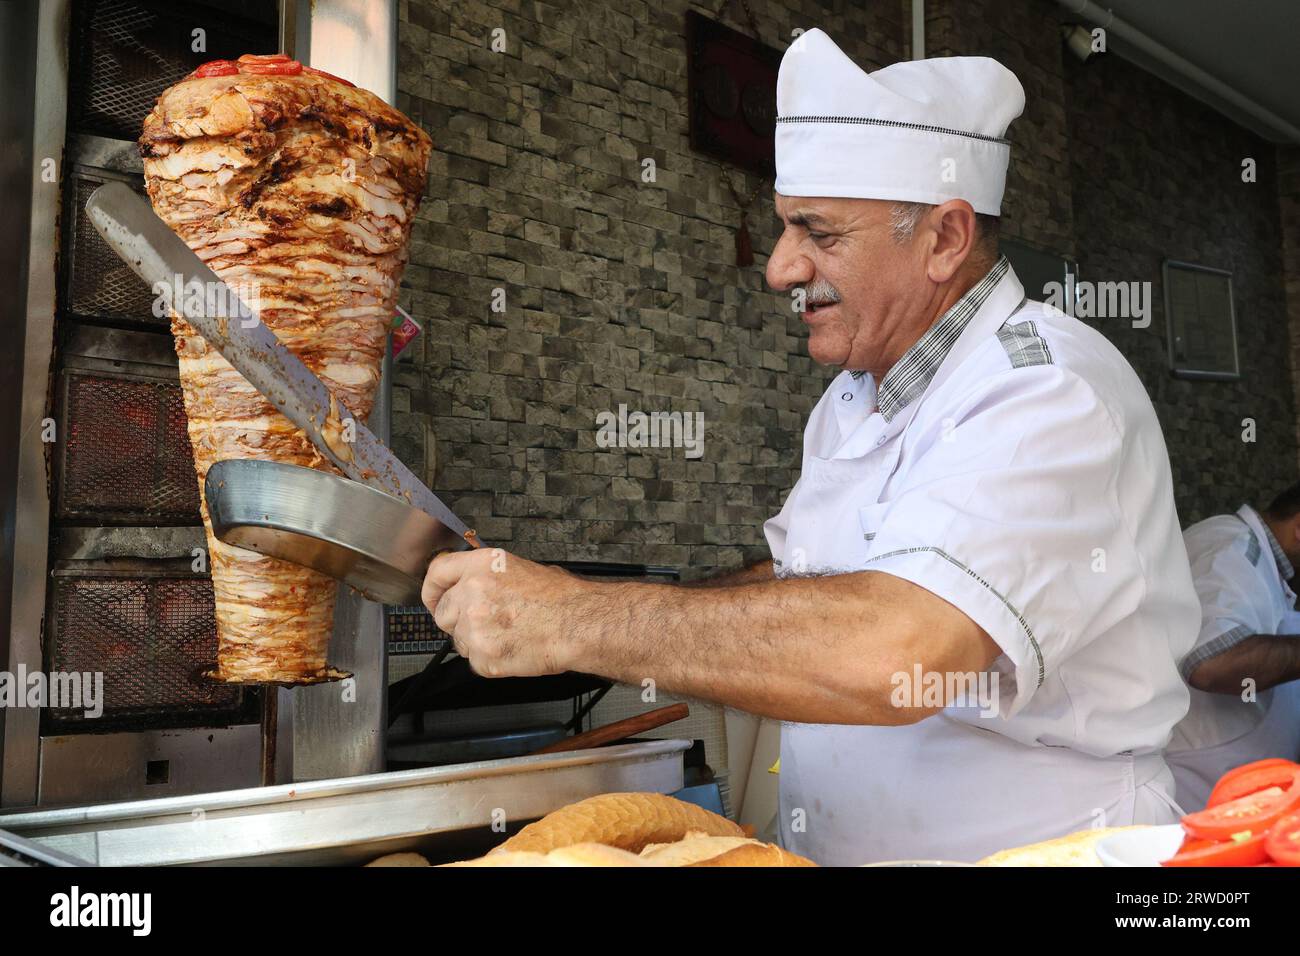 A chef slices meat with a knife to prepare a doner kebab at a restaurant in Istanbul Stock Photo